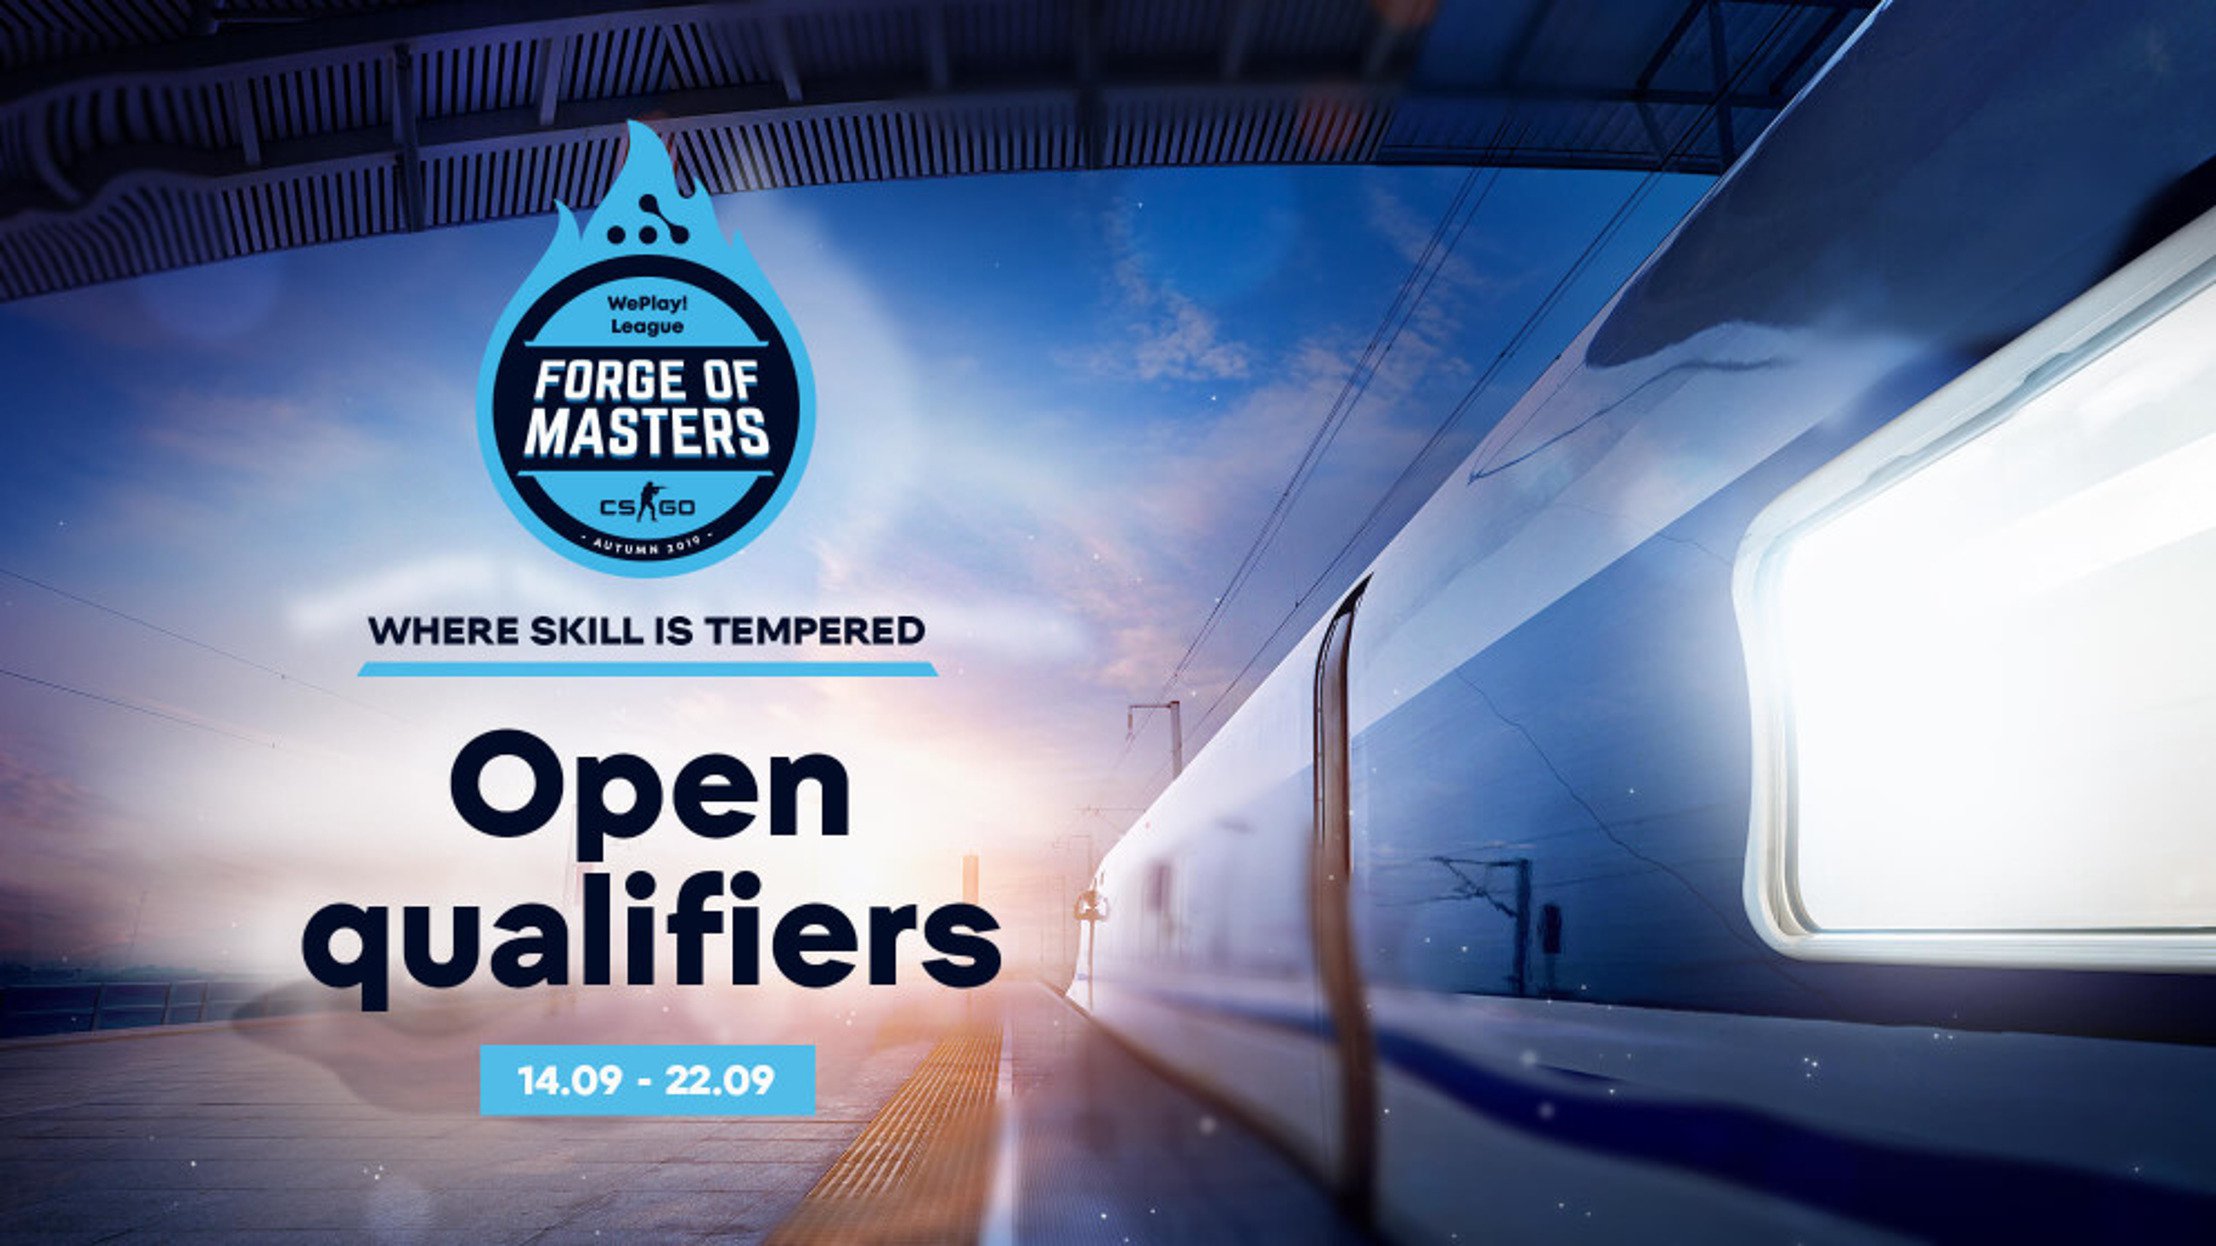 Forge of Masters WePlay! League: Open Qualifiers registration process has begun